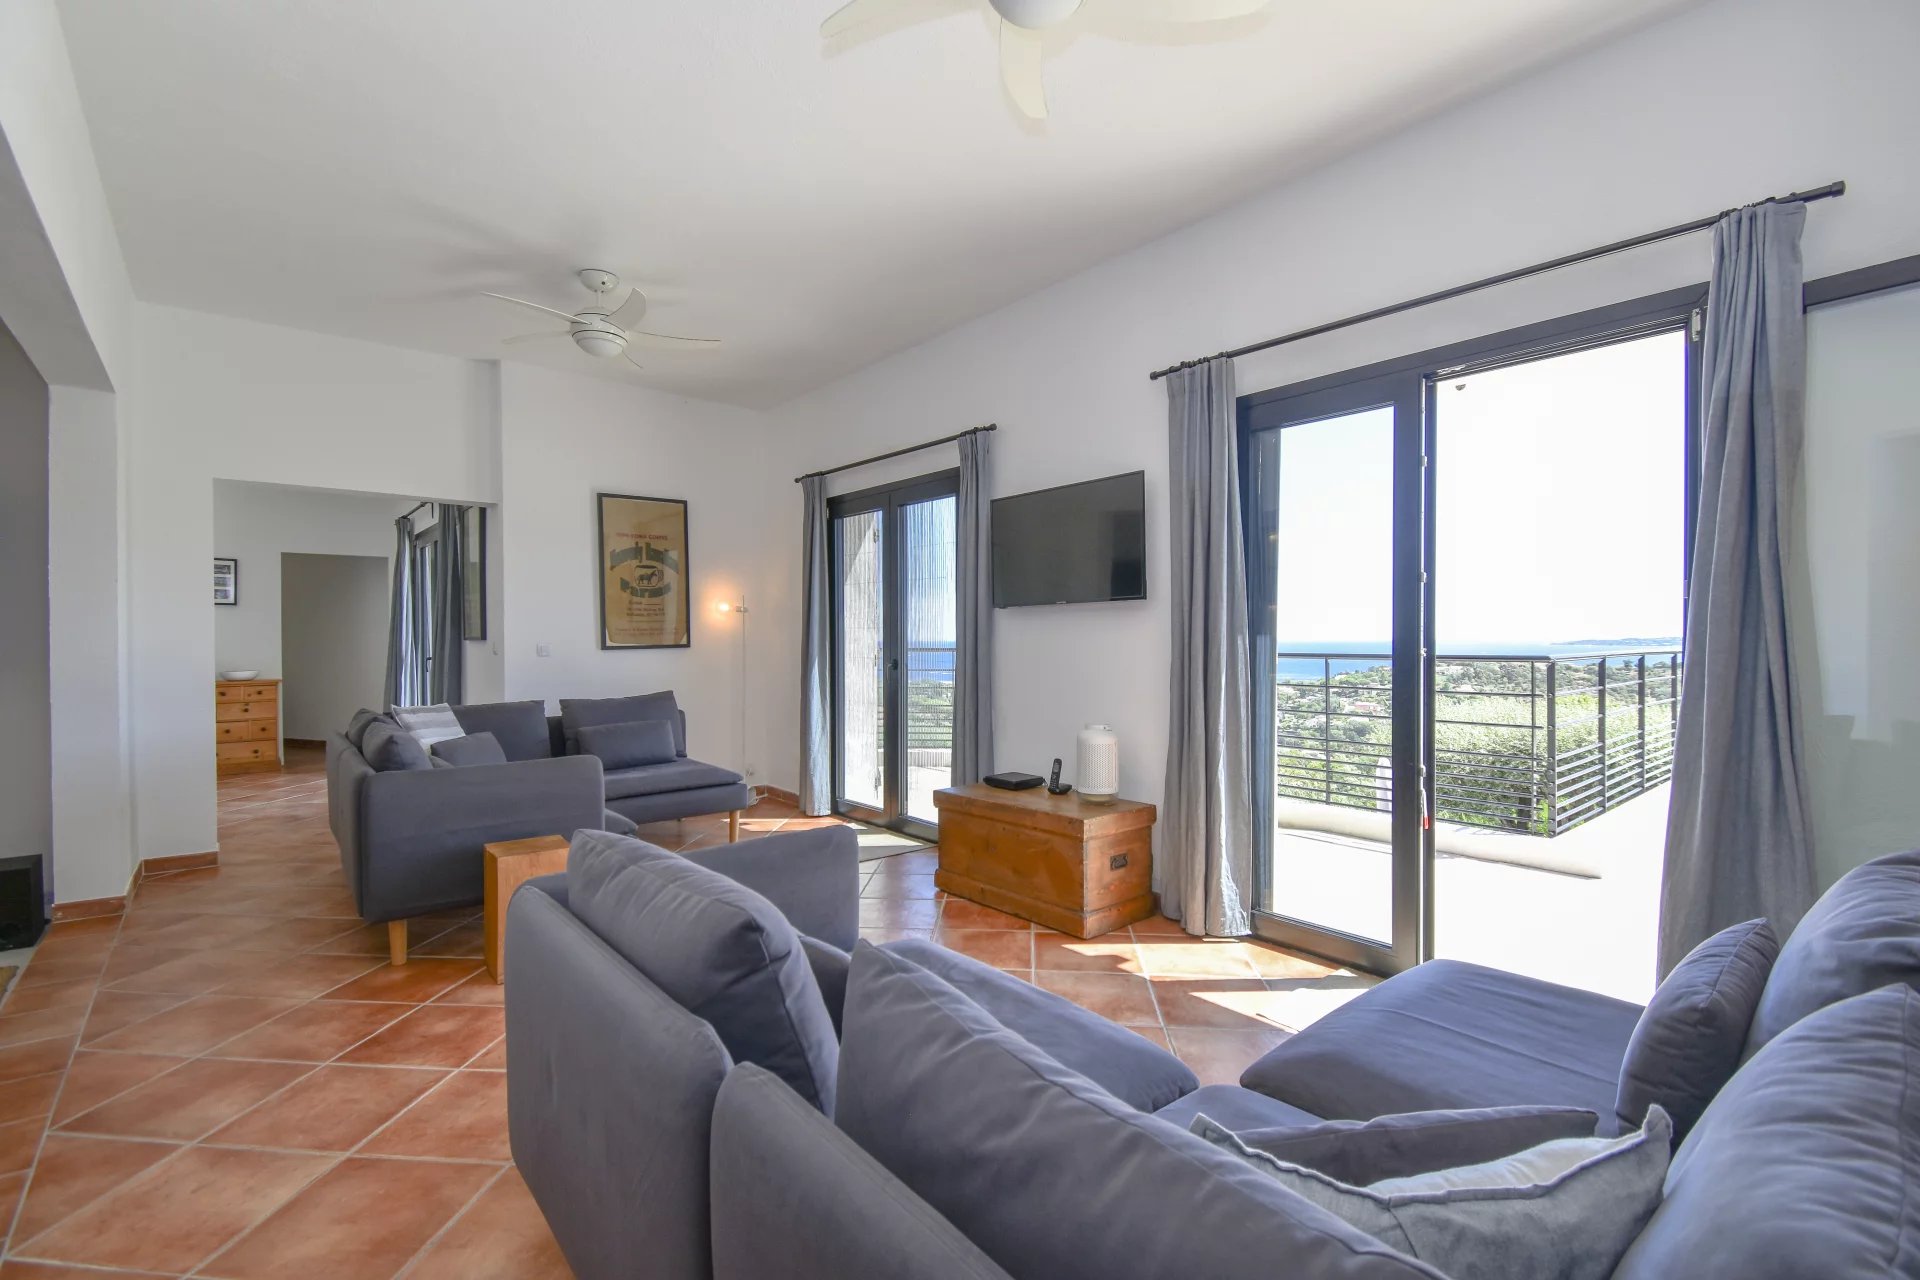 4 bedroom house with uninterrupted panoramic sea views